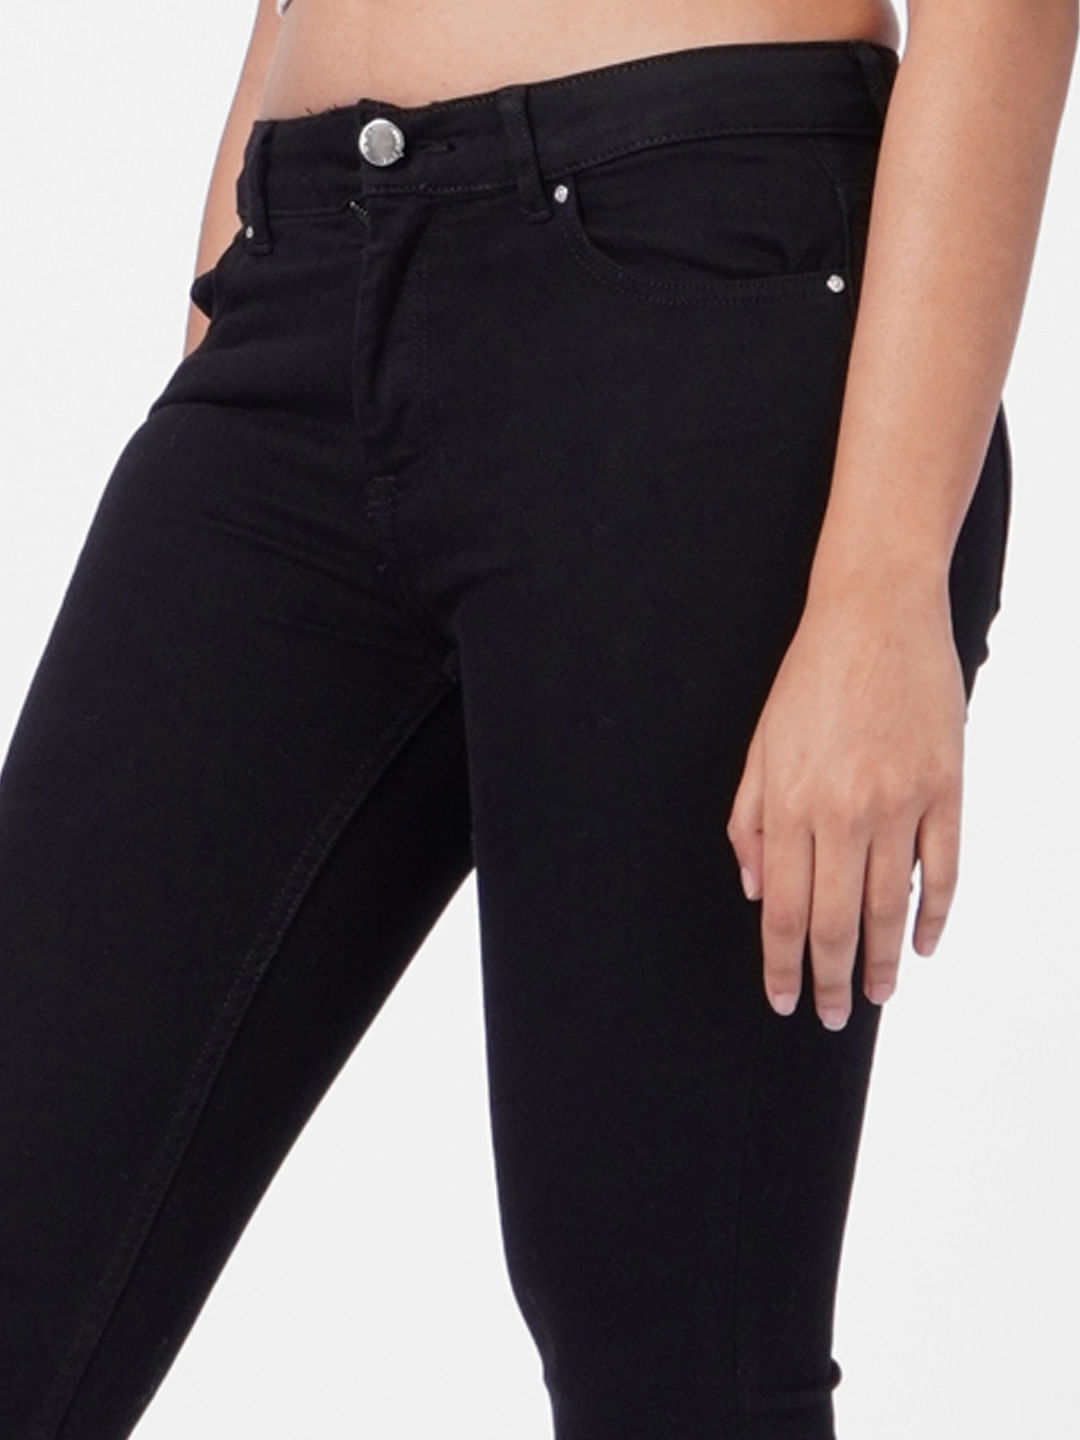 Modern Skinny Jeans High Rise Plus Size Skinny Jeans India | Ubuy